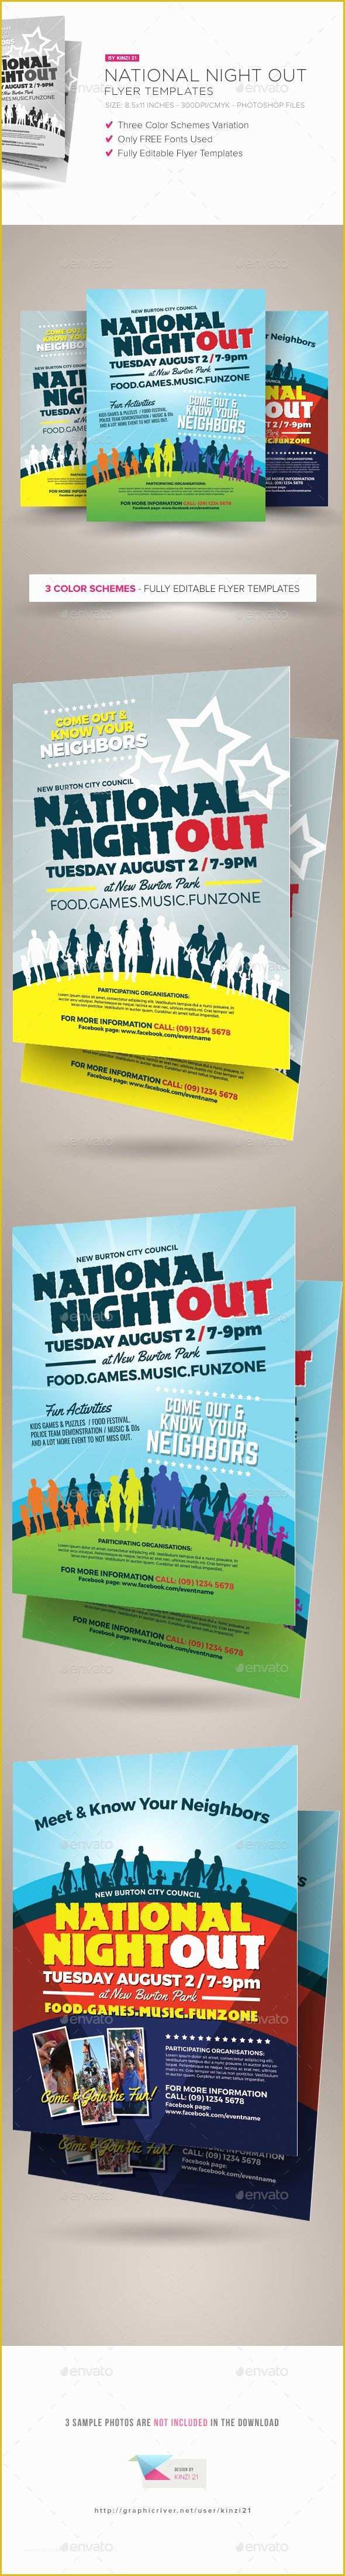 Parents Night Out Flyer Template Free Of National Night Out Flyer Templates